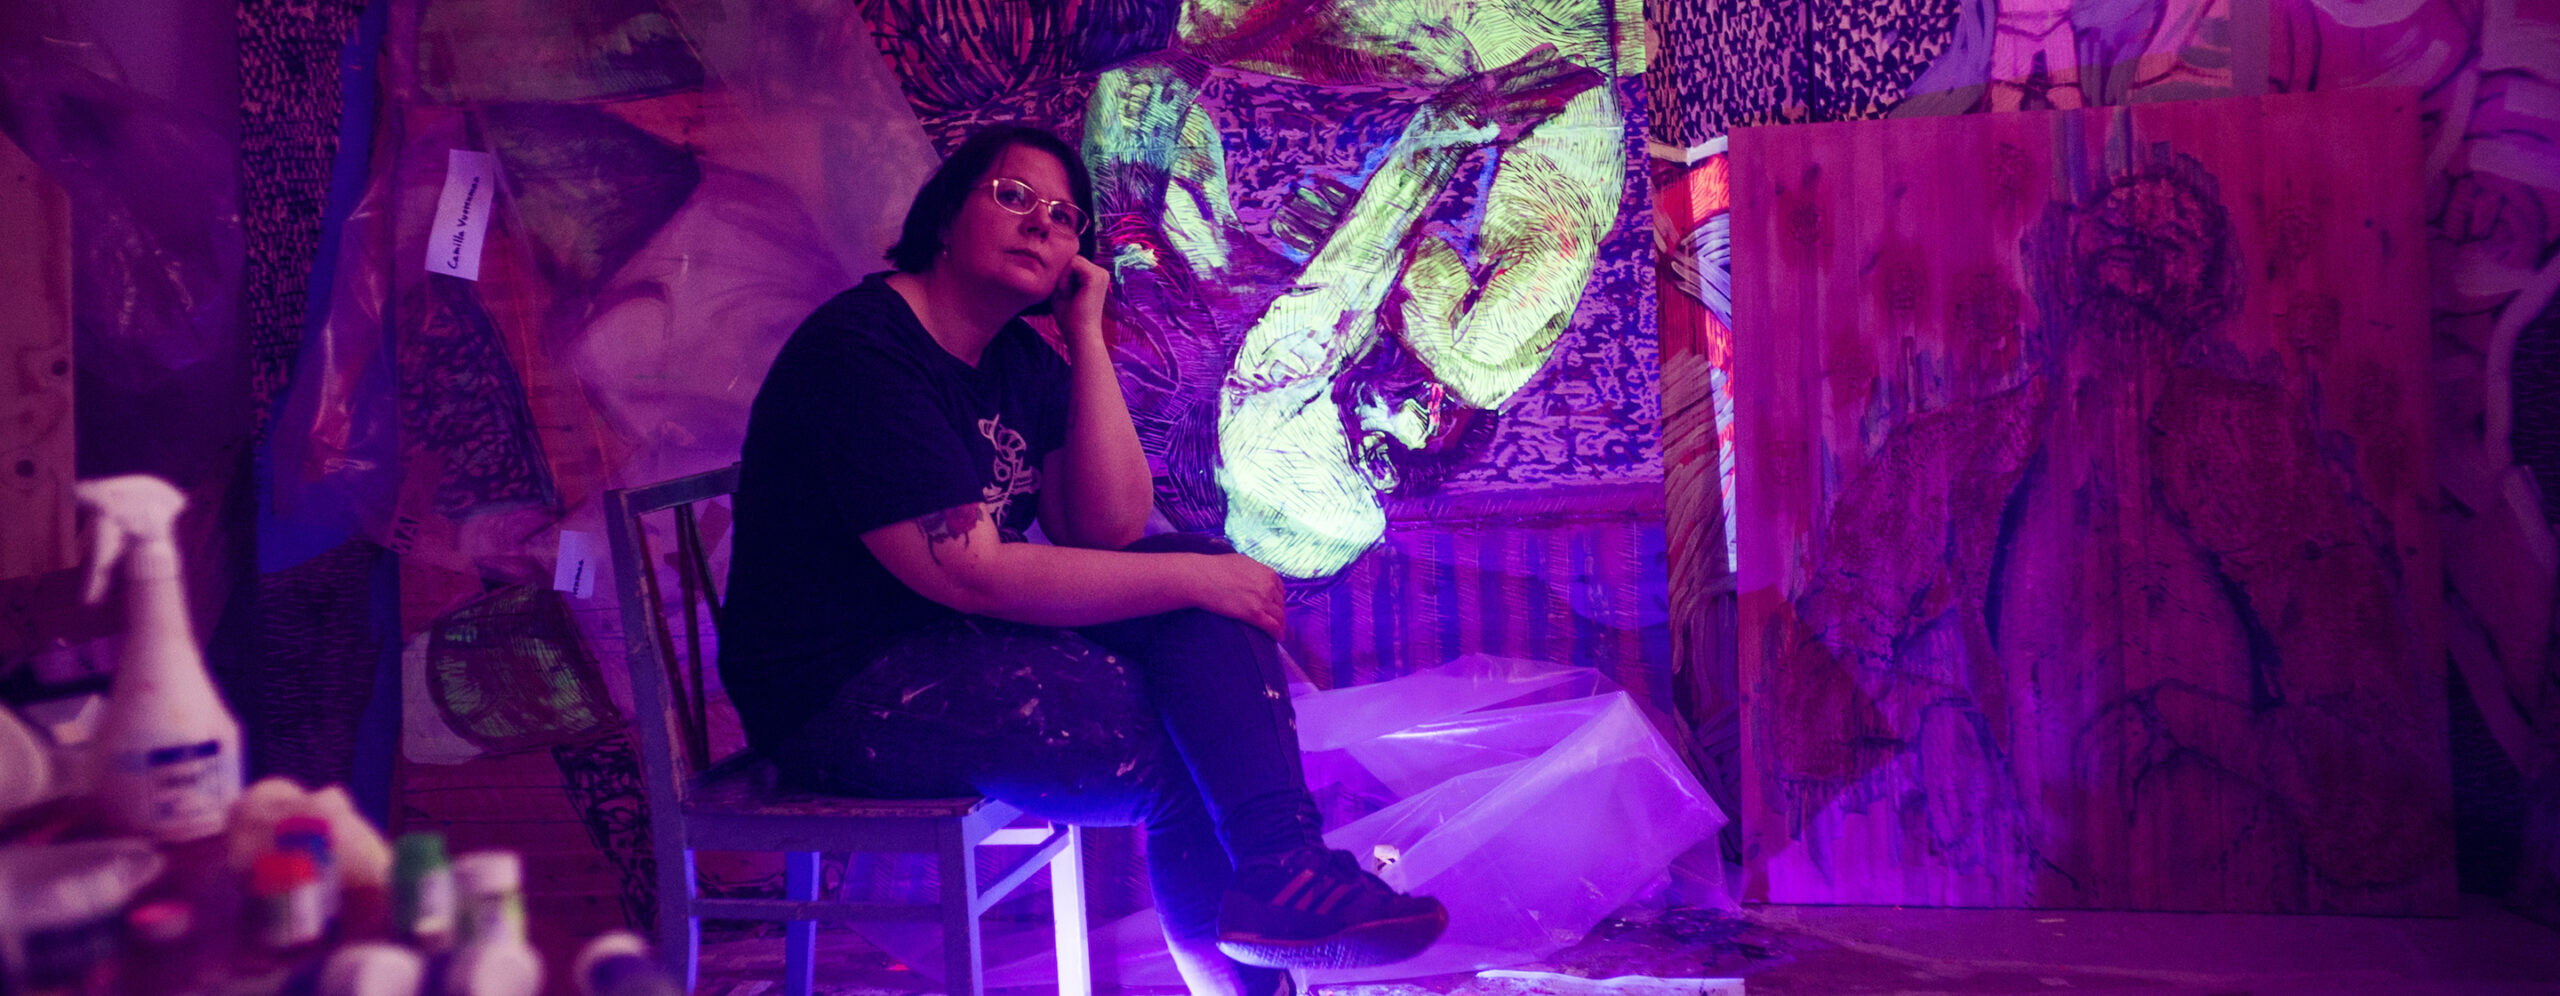 Woman sitting on a chair surrounded by paintings. The lighting is dark fluorescent purple.